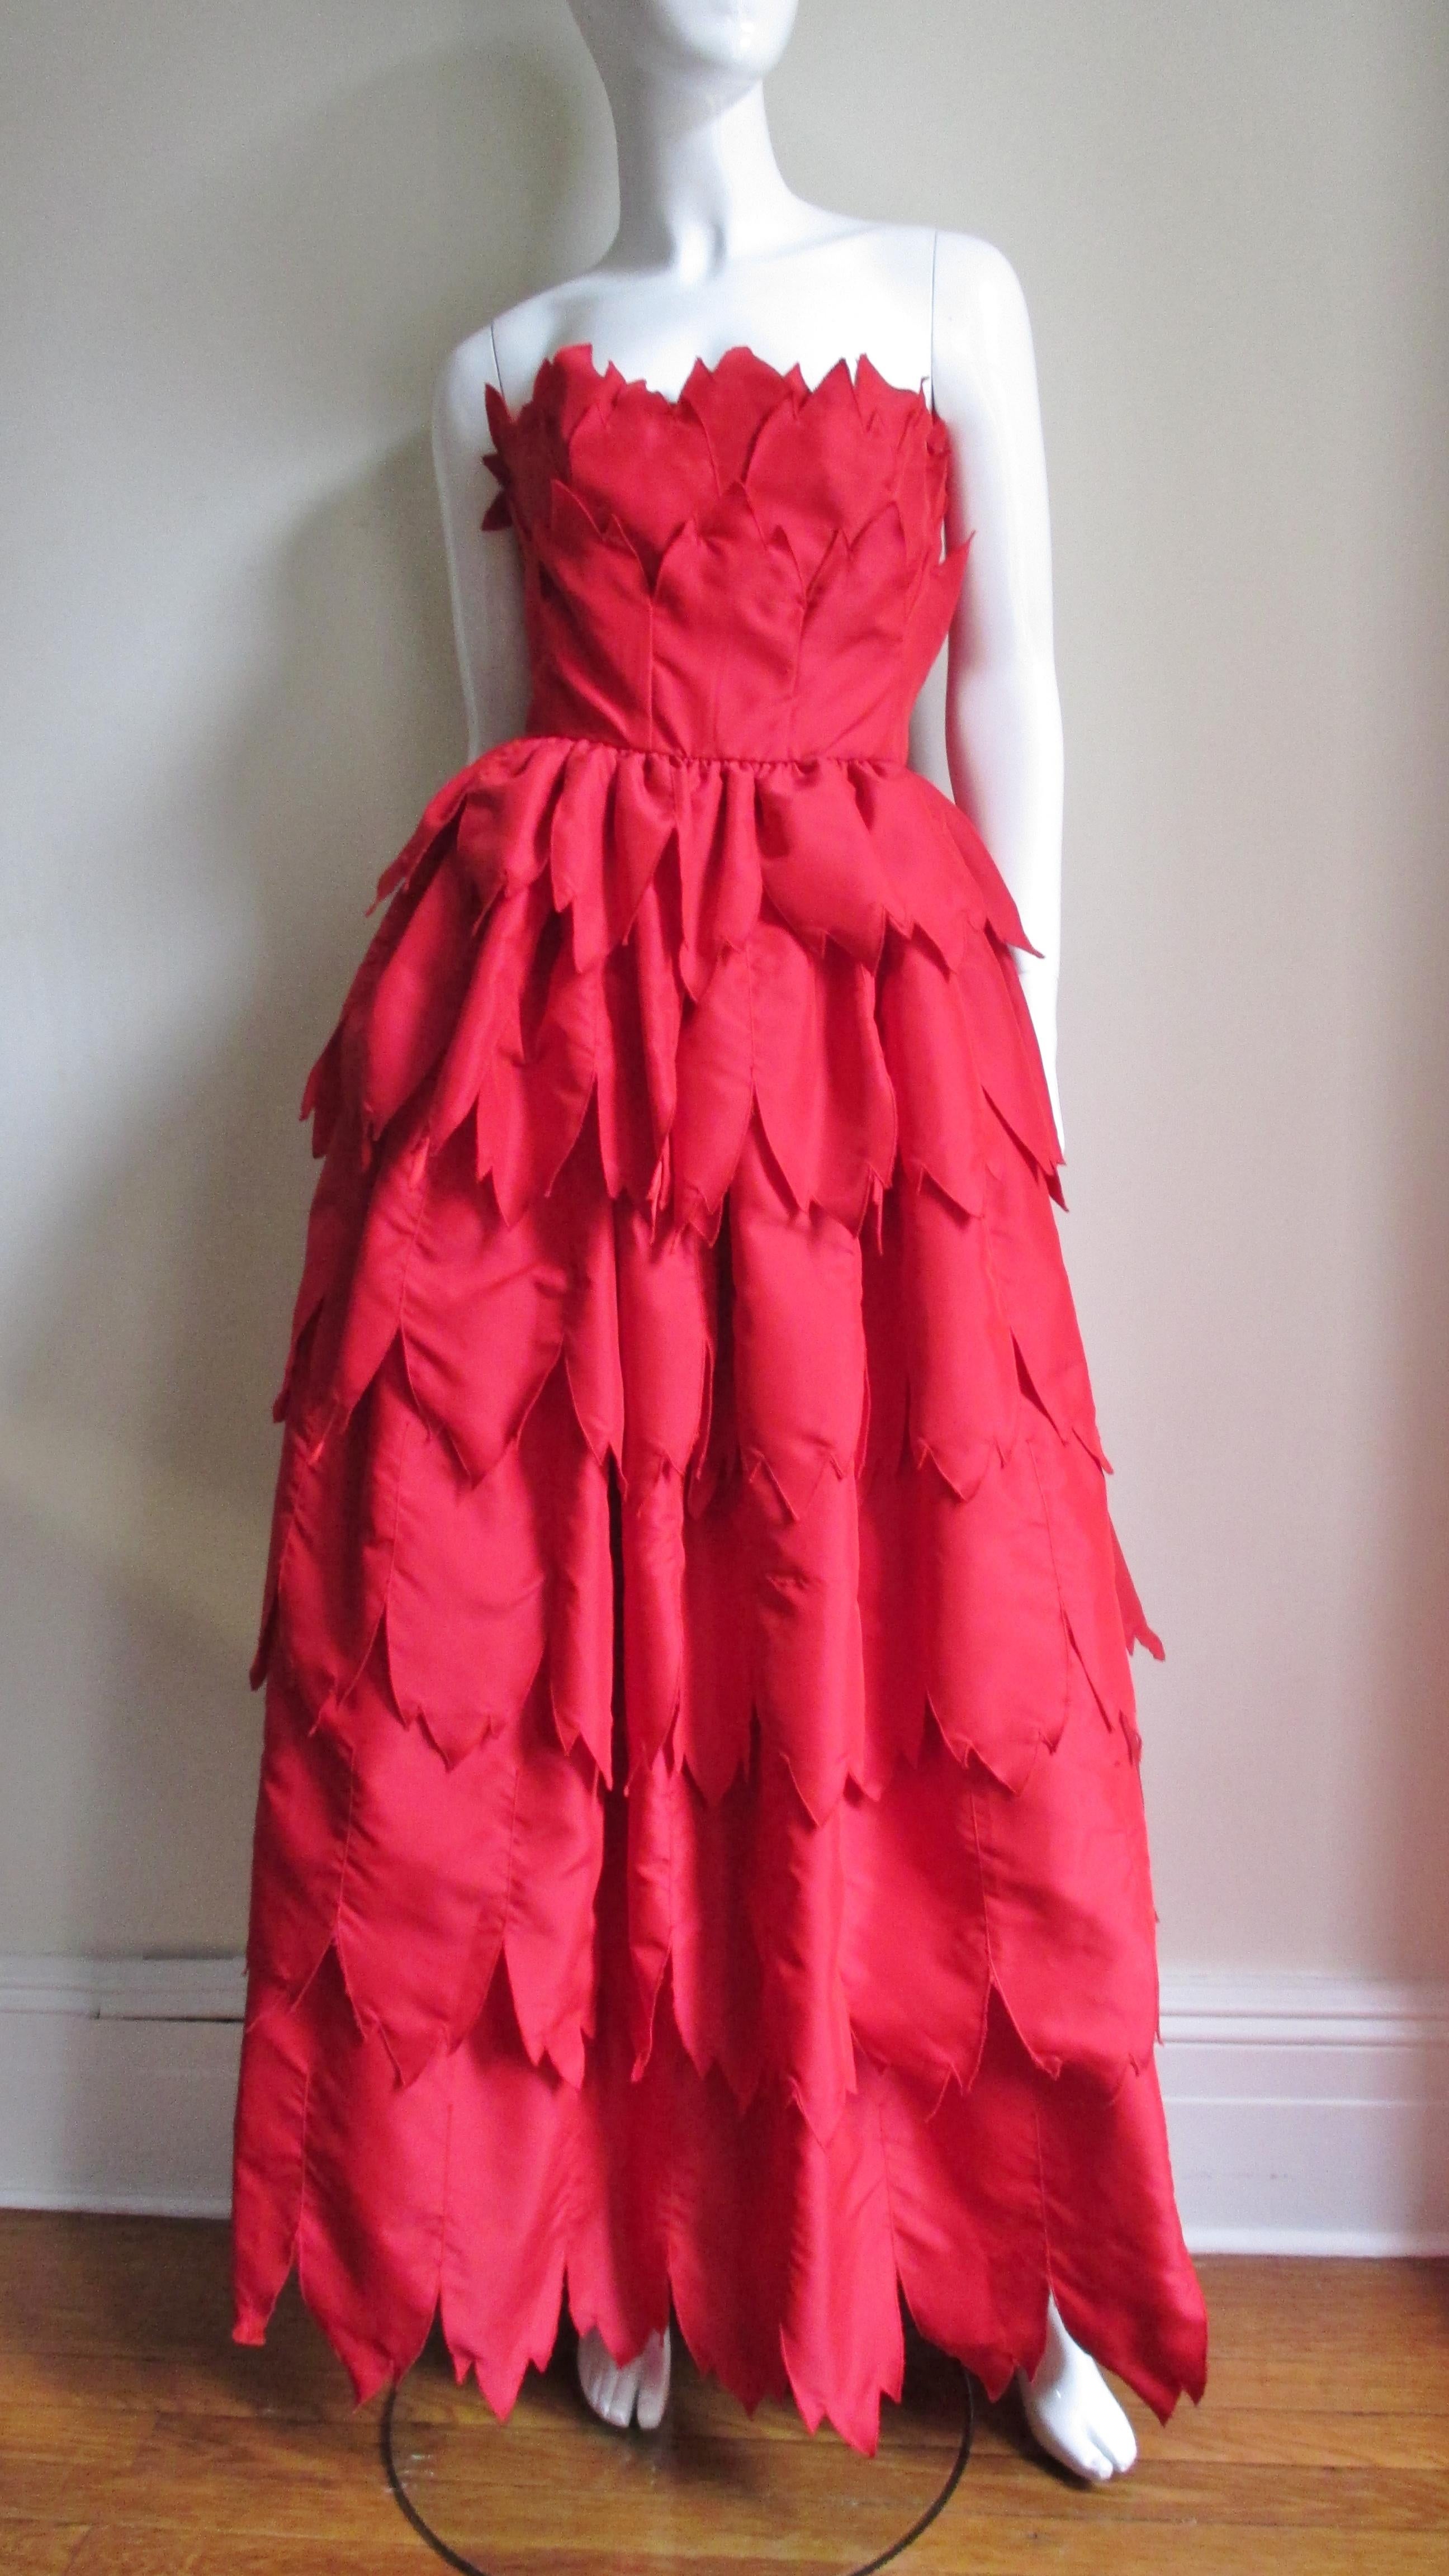 From acclaimed designer William Travilla a stunning gown comprised of layers of pointed edge red silk. He is famous for among other things creating Marilyn Monroe's iconic subway vent dress for the movie The Seven Year Itch. This dress is strapless